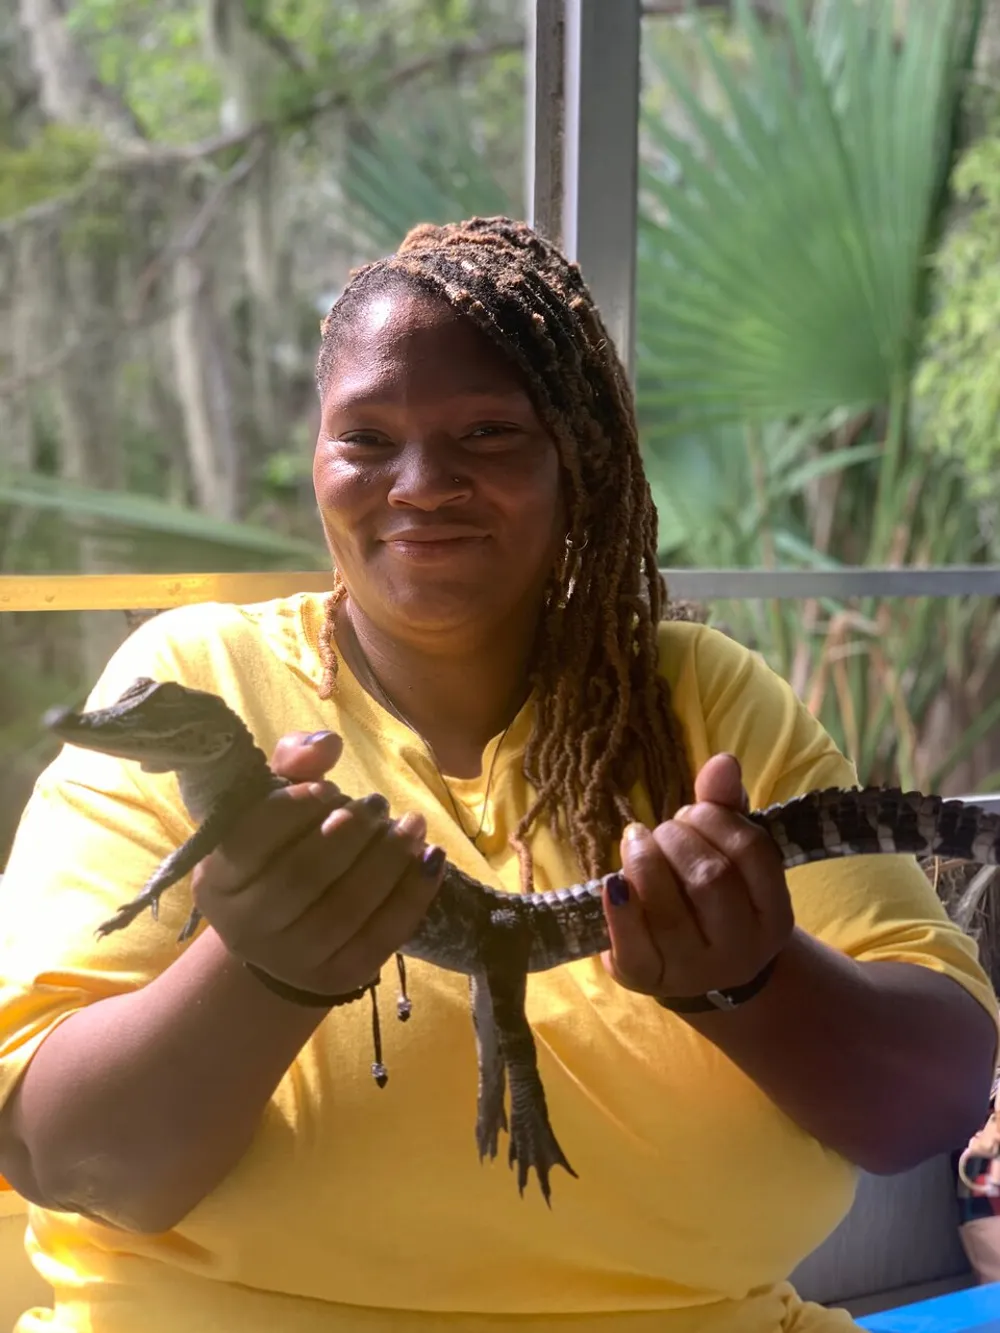 A smiling person is holding a small alligator with a backdrop of greenery